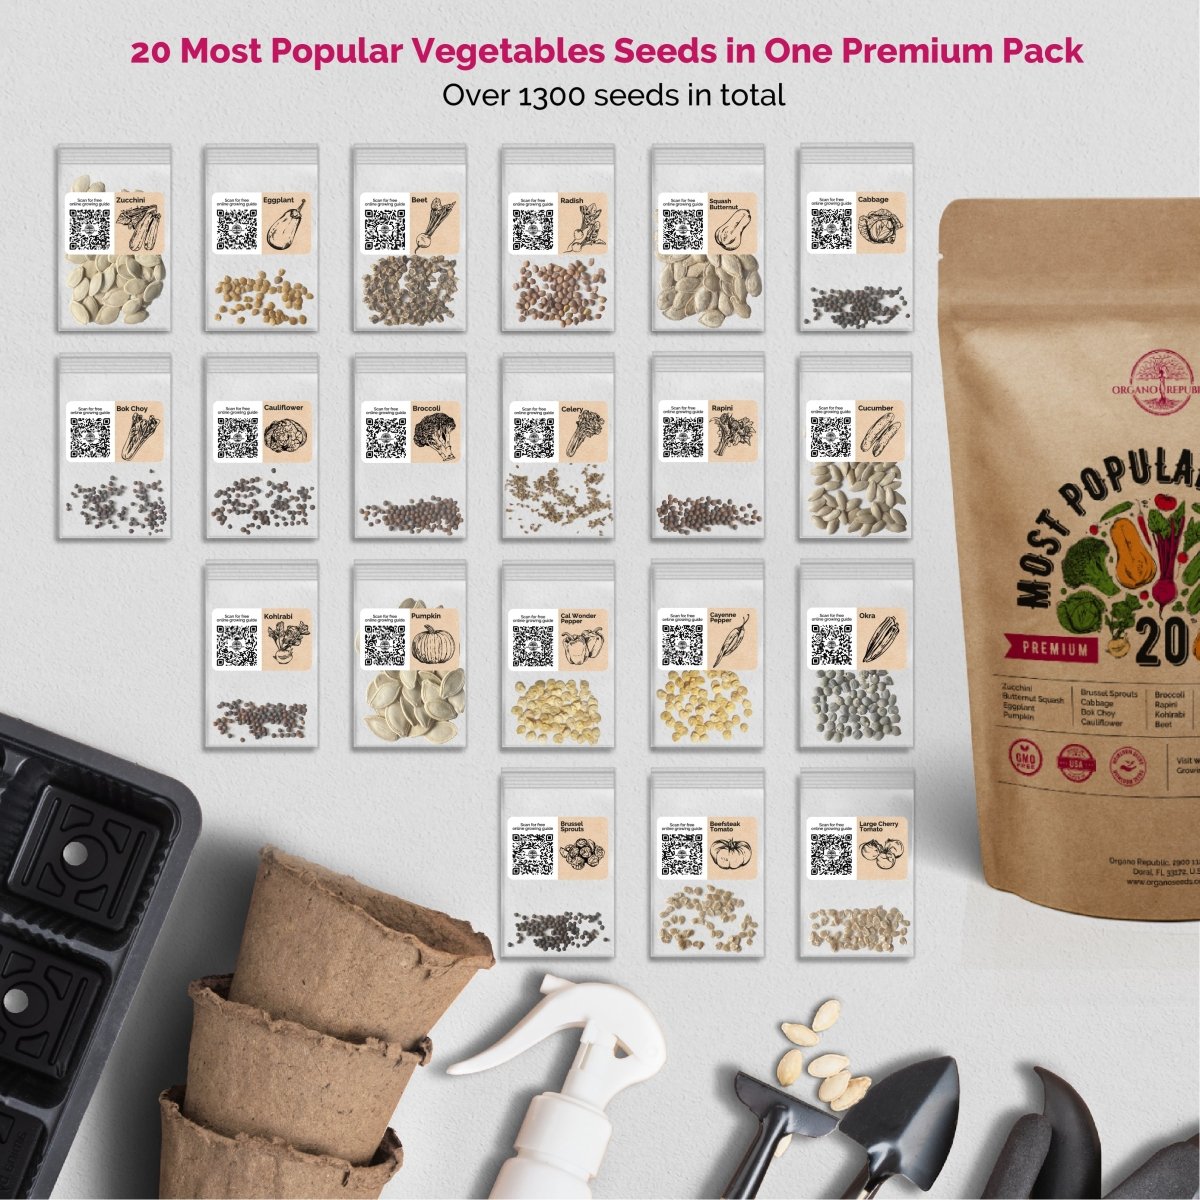 Arugula Microgreens & 20 Most Popular Vegetables Seeds Bundle Non-GMO Heirloom Seeds for Planting Indoor and Outdoor Over 221,300 Microgreen & Vegetables Seeds in One Value Bundle - Organo Republic